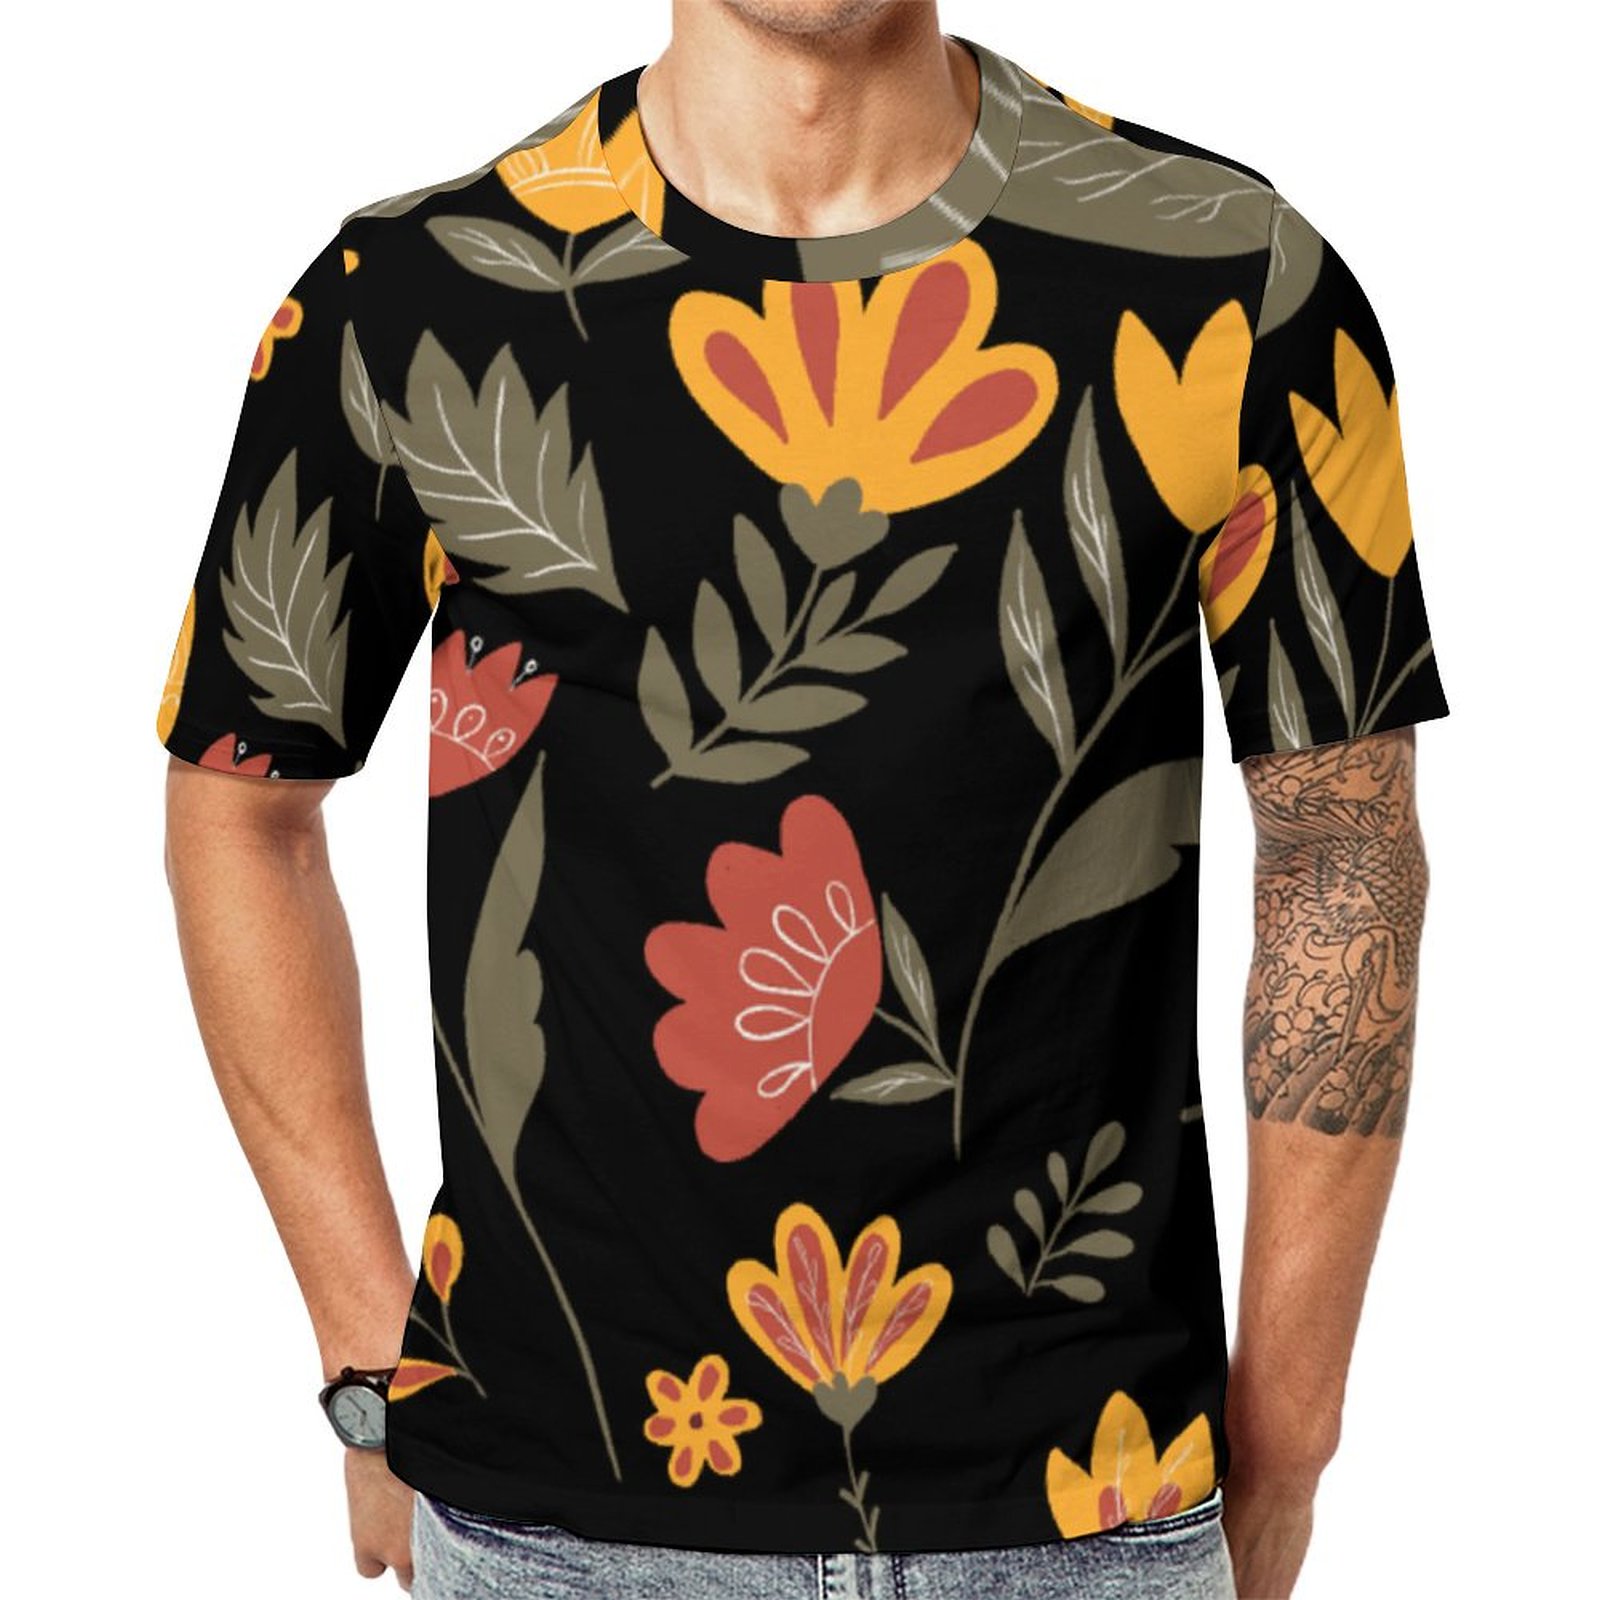 Rust Gold &Green Flowers Birds On Black Short Sleeve Print Unisex Tshirt Summer Casual Tees for Men and Women Coolcoshirts